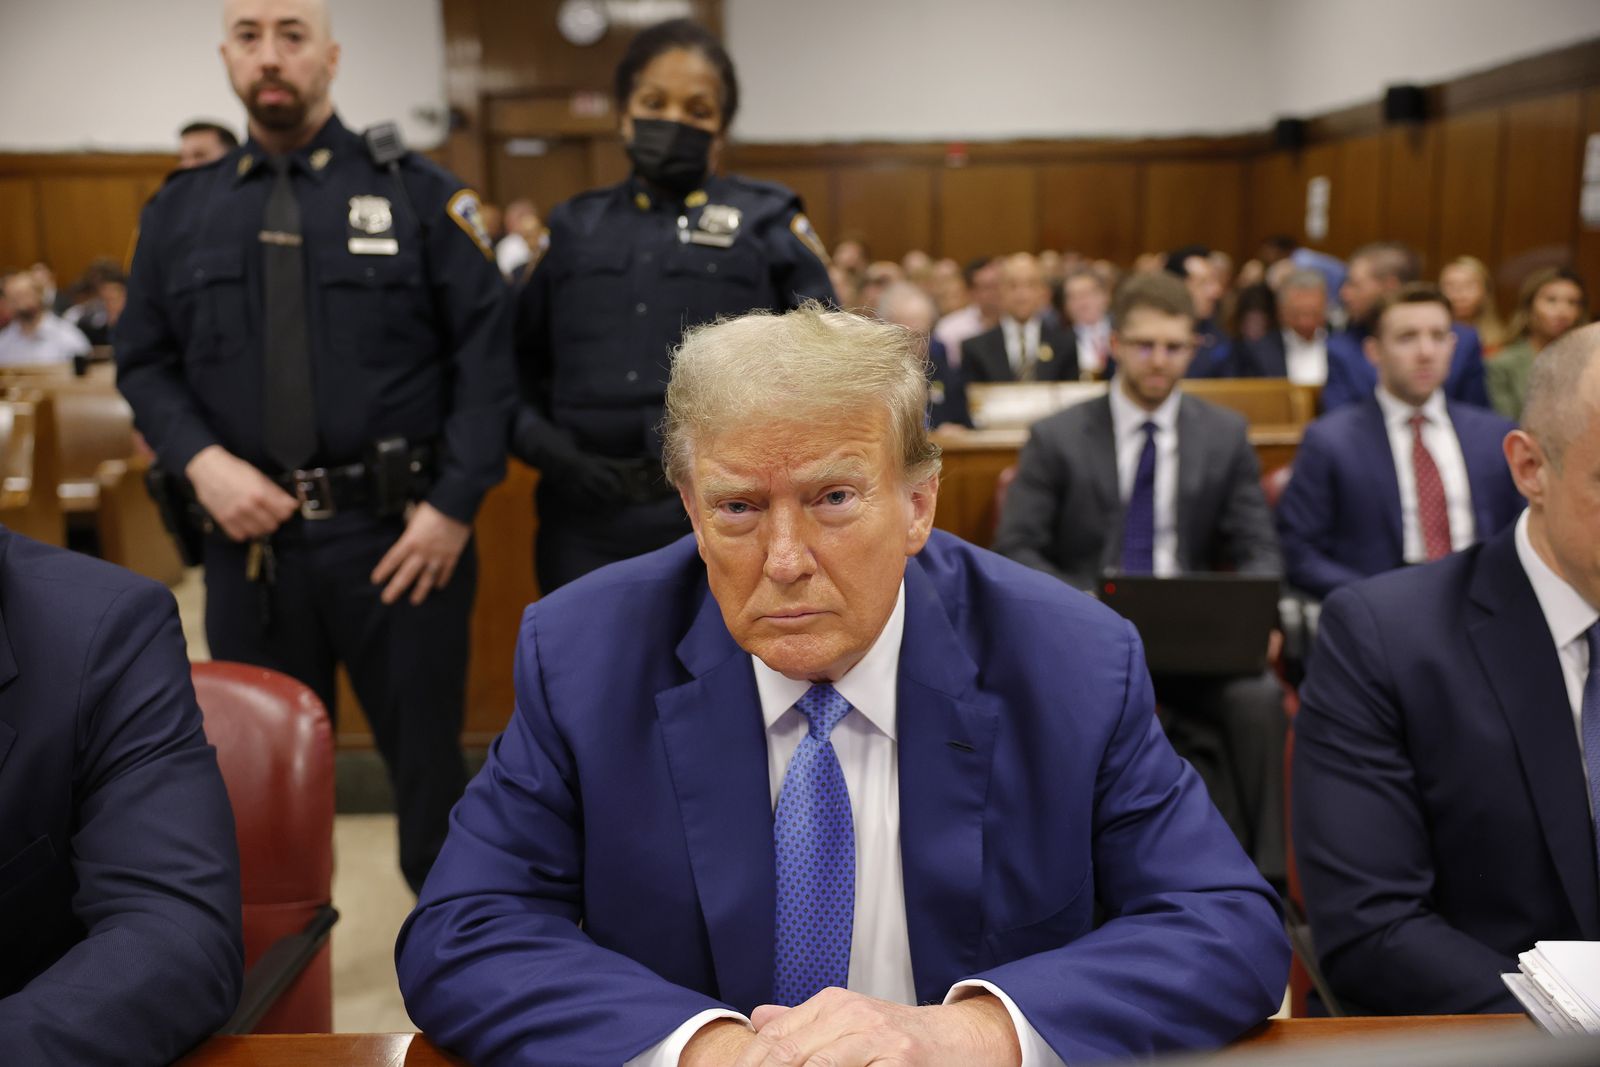 epa11355496 Former US President Donald Trump sits in the courtroom during his hush money trial at the Supreme Court of the State of New York in New York, New York, USA, 20 May 2024. Trump is facing 34 felony counts of falsifying business records related to payments made to adult film star Stormy Daniels during his 2016 presidential campaign.   EPA/Michael M. Santiago / POOL